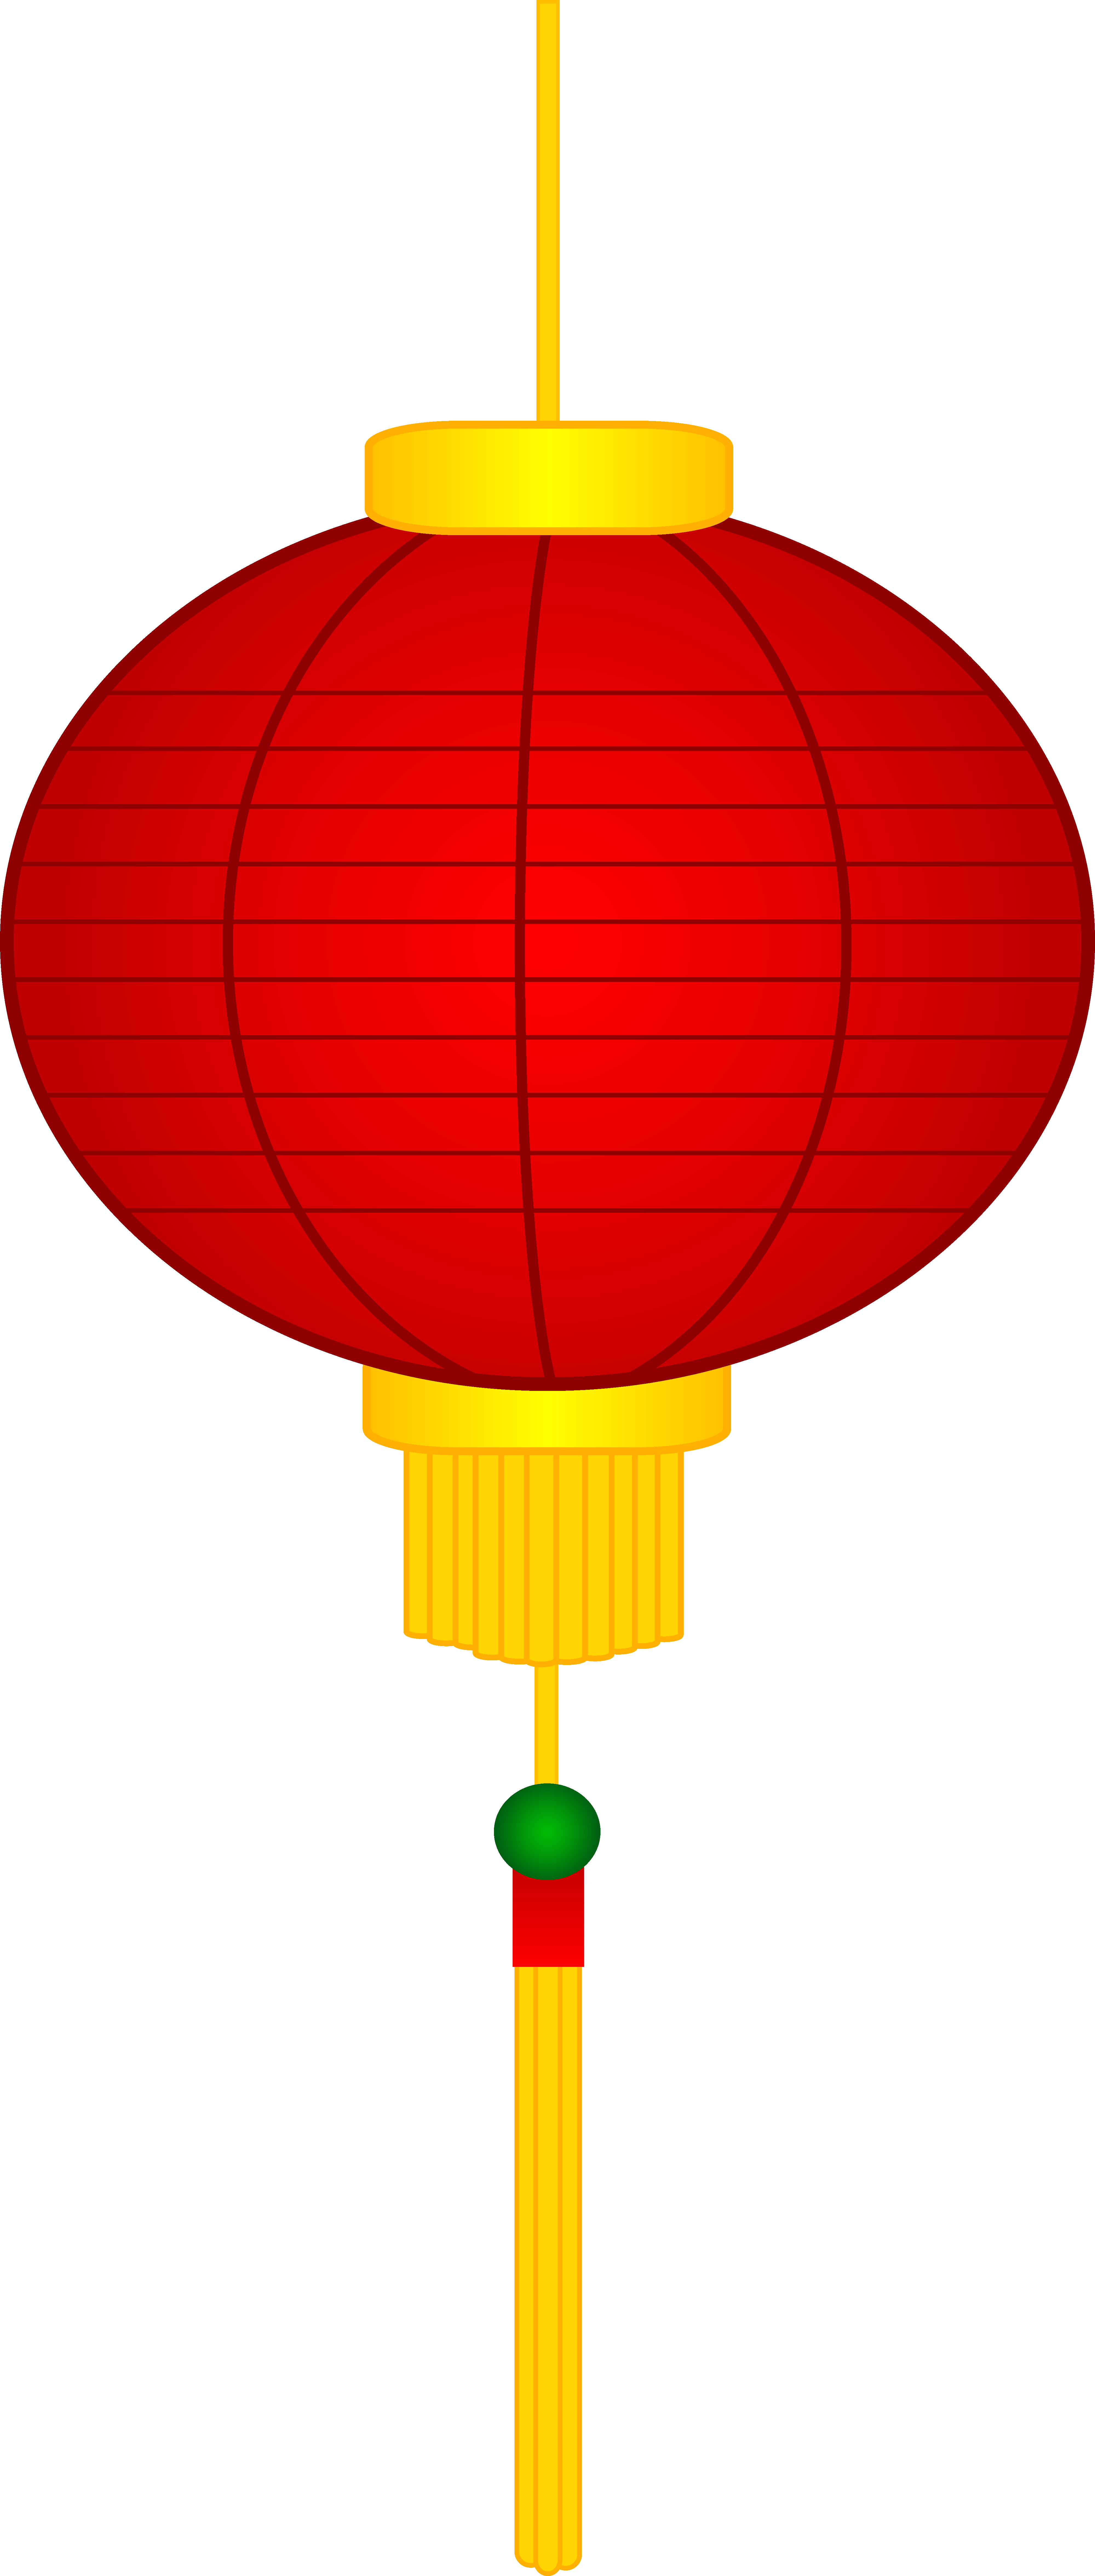 Red paper free clip. China clipart lantern chinese